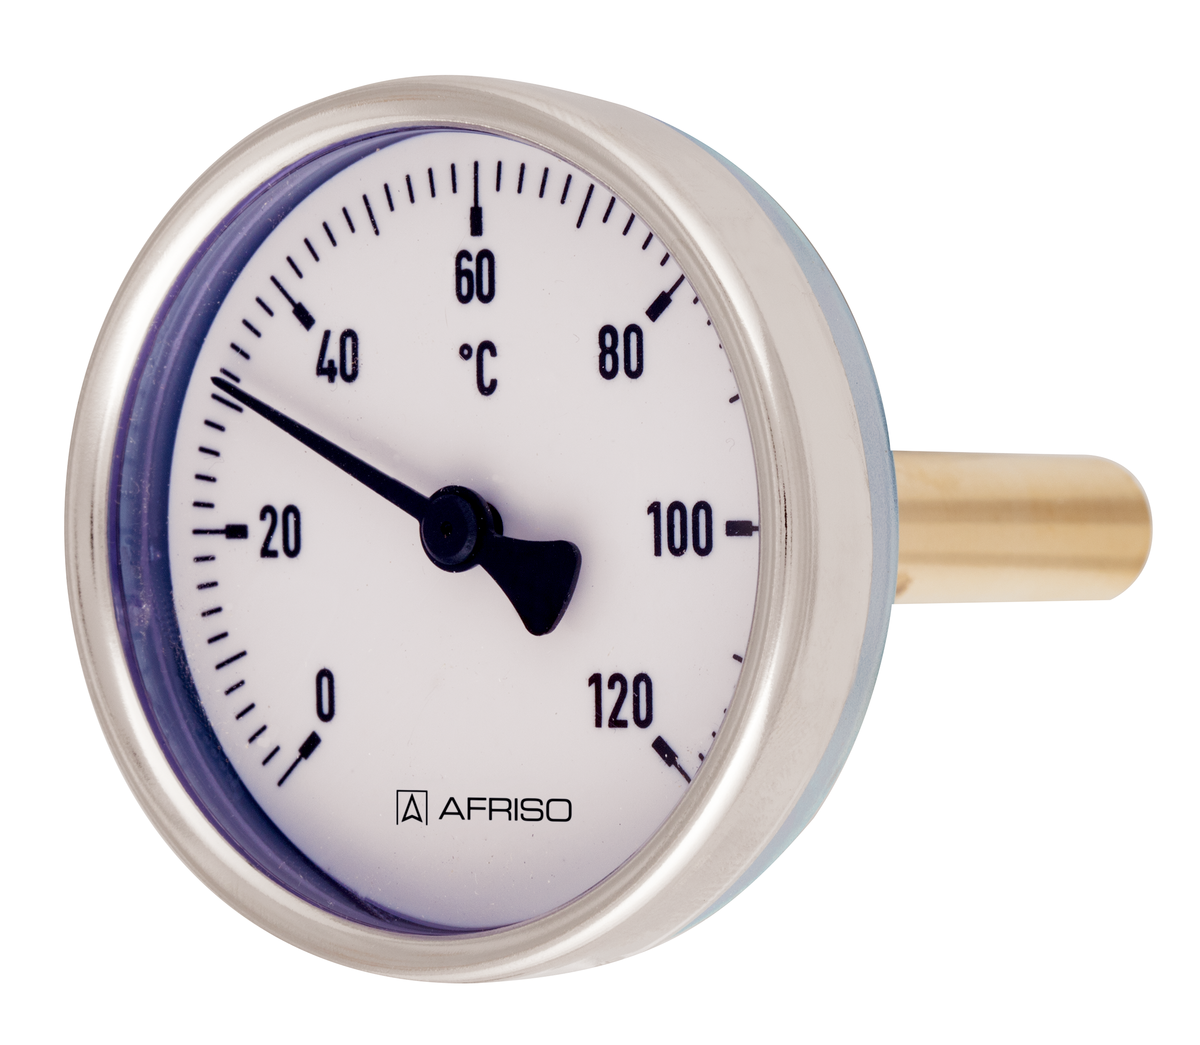 AFRISO Bimetall-Thermometer BiTh 50 ST 0/60C 40mm G1/2B axial Kl.2 SAR 88350 88360 88370 88380 88400 88410 88420 88430 88460 88470 88480 88490 88510 88520 88530 88540 88560 88570 88580 88590 88610 88620 88630 88640 88670 88680 88690 88700 88720 88730 88740 88750 88770 88780 88790 88800 88810 88830 88840 88850 88860 88890 88900 88910 88920 88940 88950 88960 88970 88990 89000 89010 89020 89030 89050 89060 89070 89080